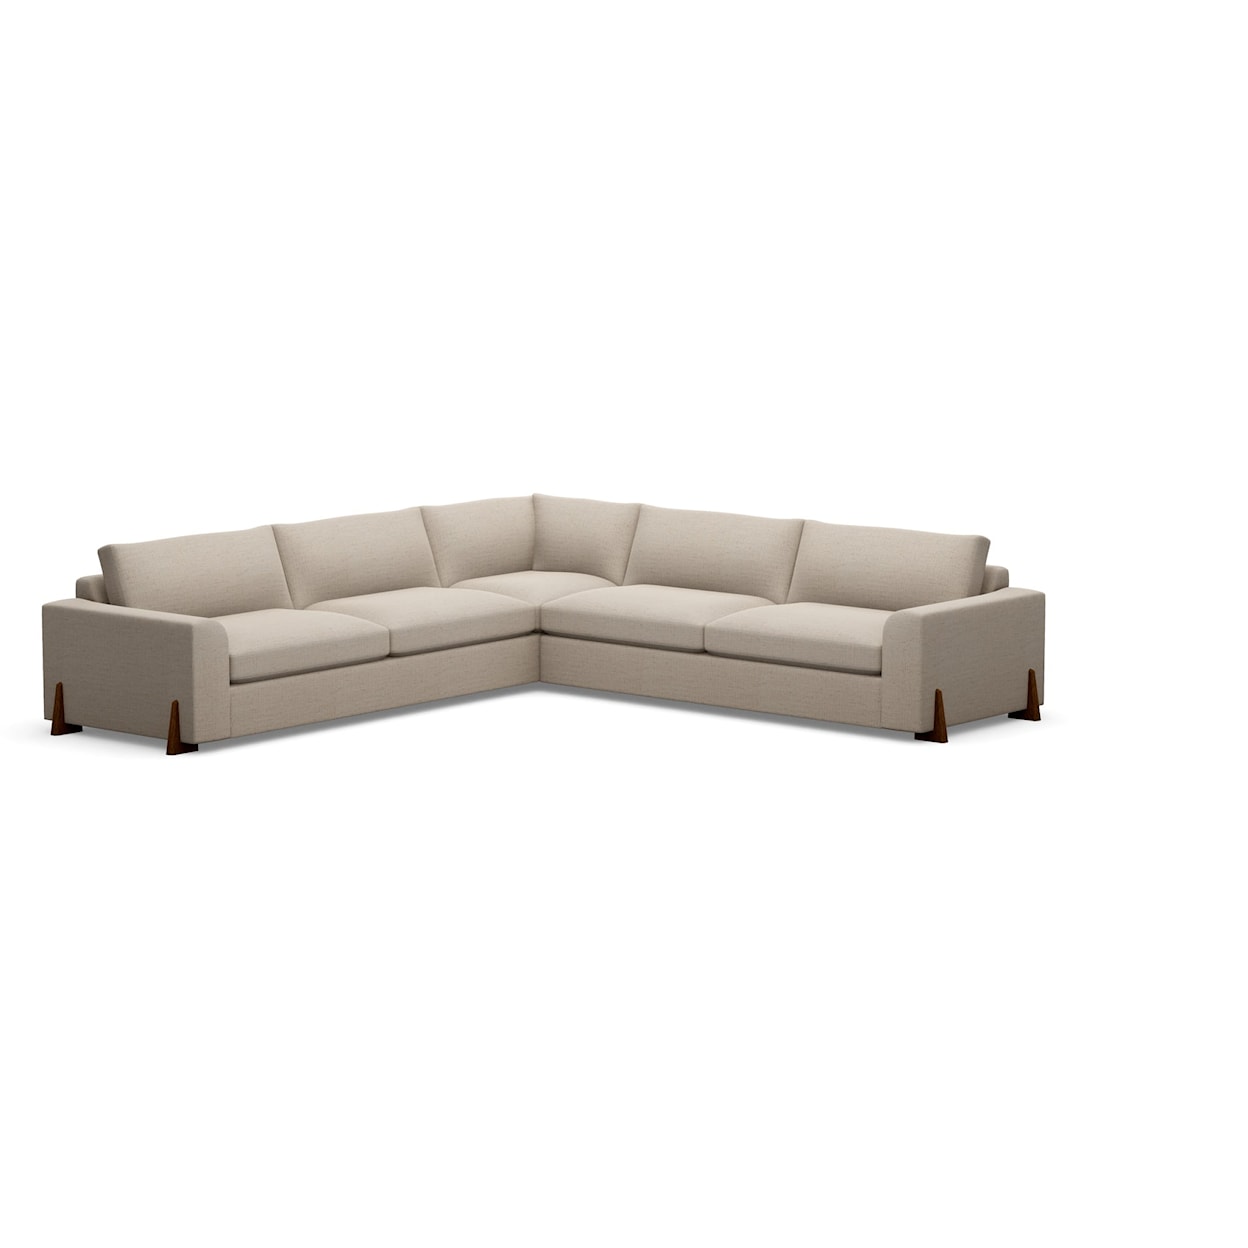 Century Great Room 2-Piece Sectional Sofa